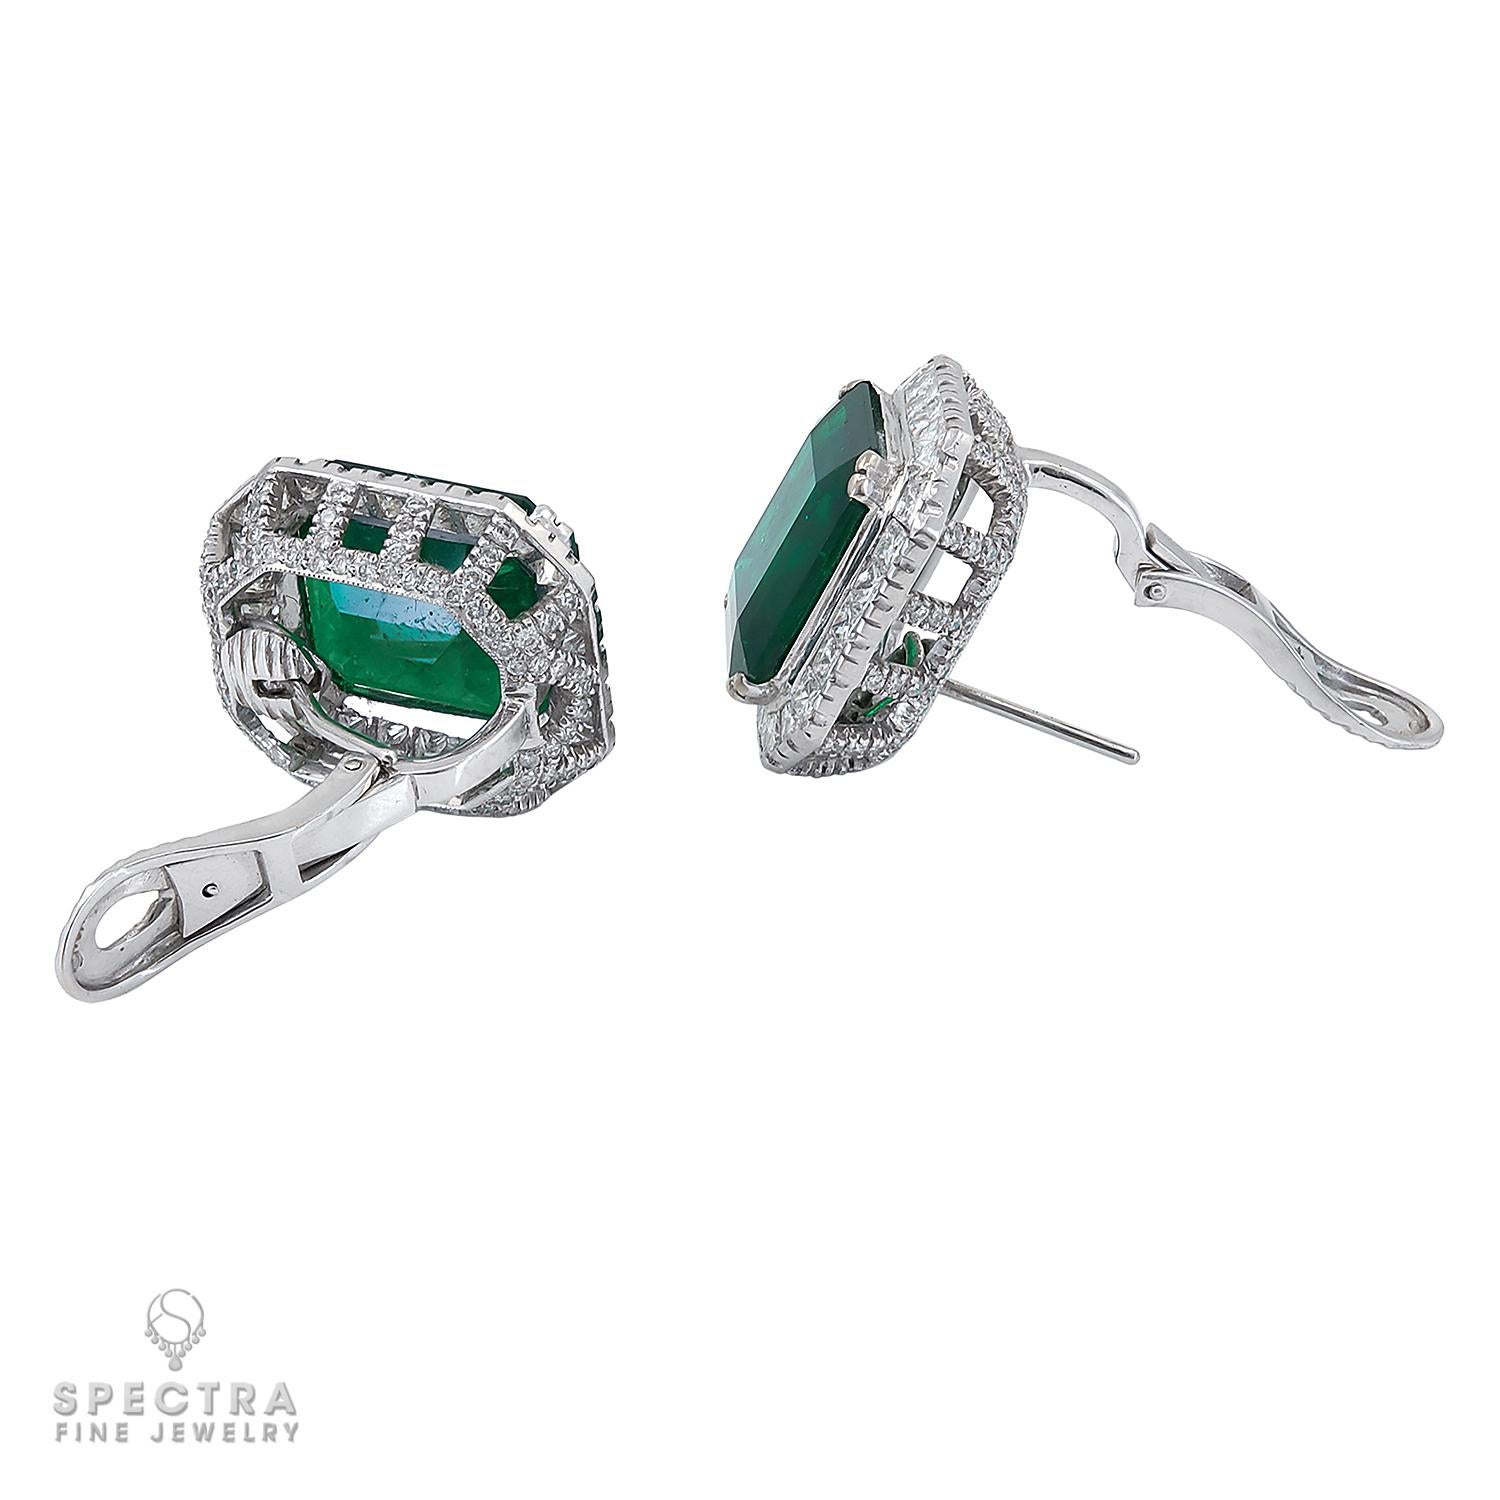 This pair of Art Deco-inspired geometric emerald and diamond pierced earrings with French clips are made by Spectra Fine Jewelry in the contemporary era, circa 2010s, and feature two emerald-cut green emeralds, weighing approximately 23.44 carats